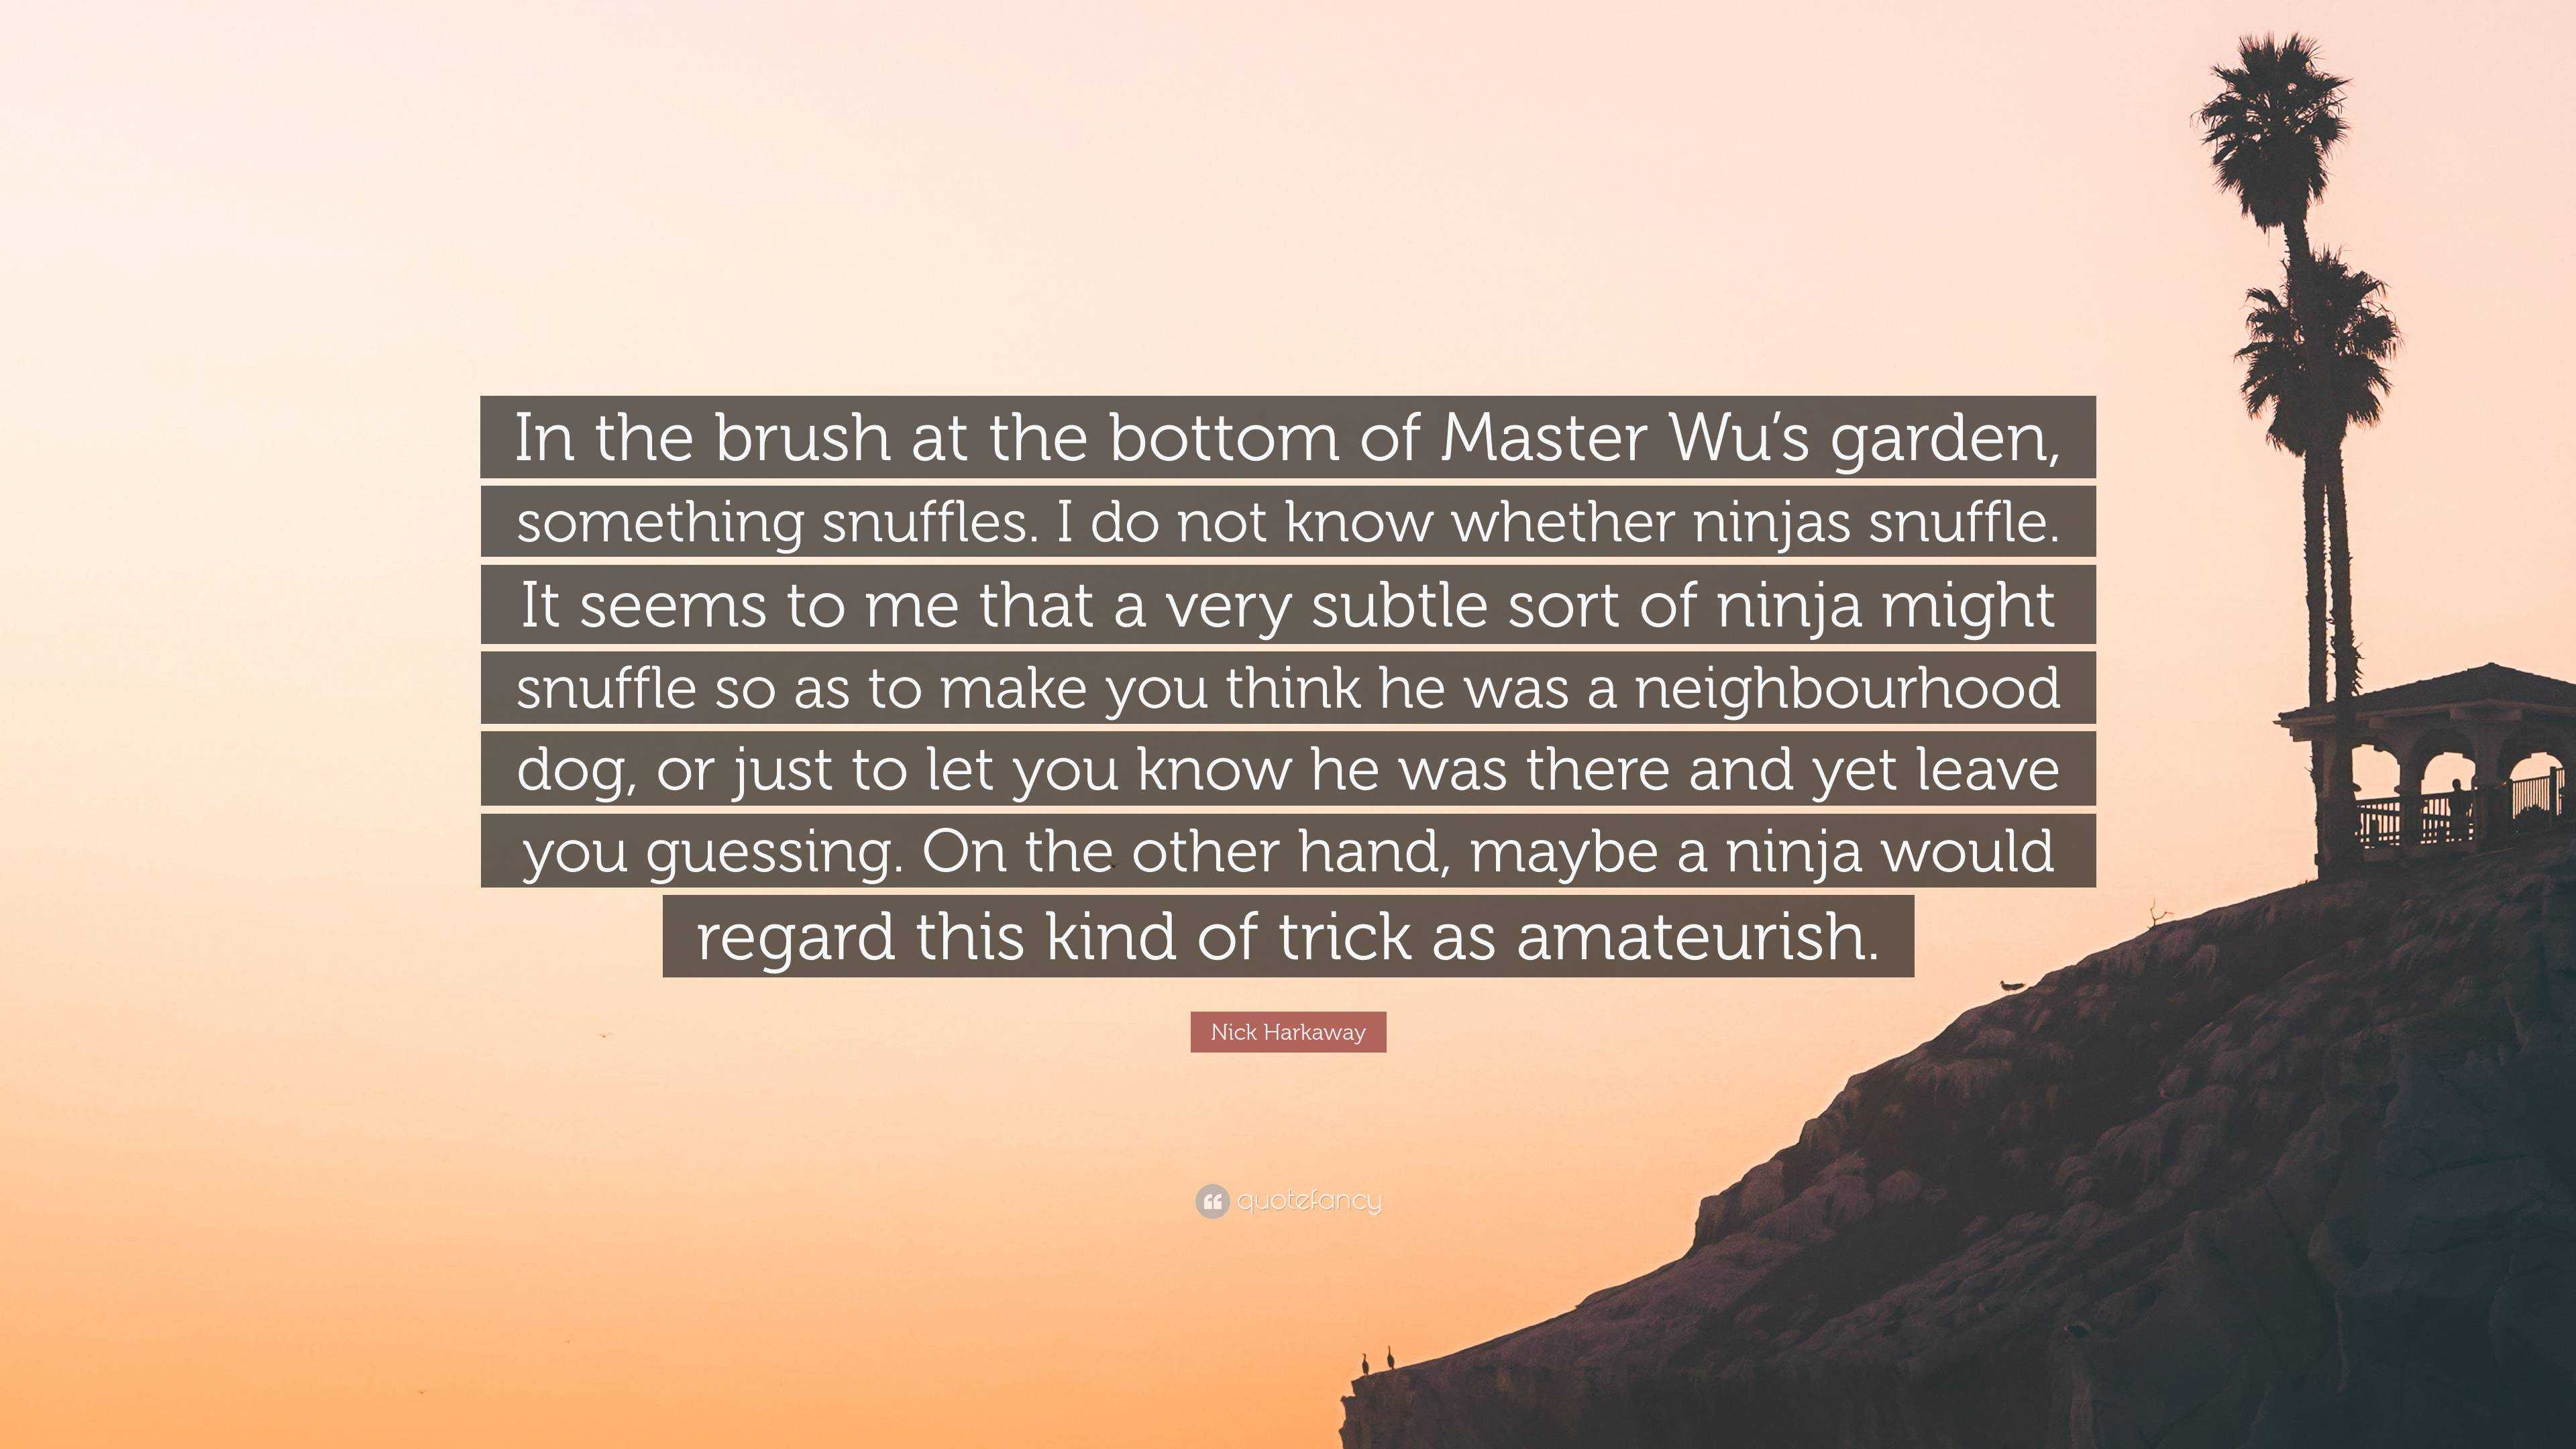 Nick Harkaway Quote: “In the brush at the bottom of Master Wu's